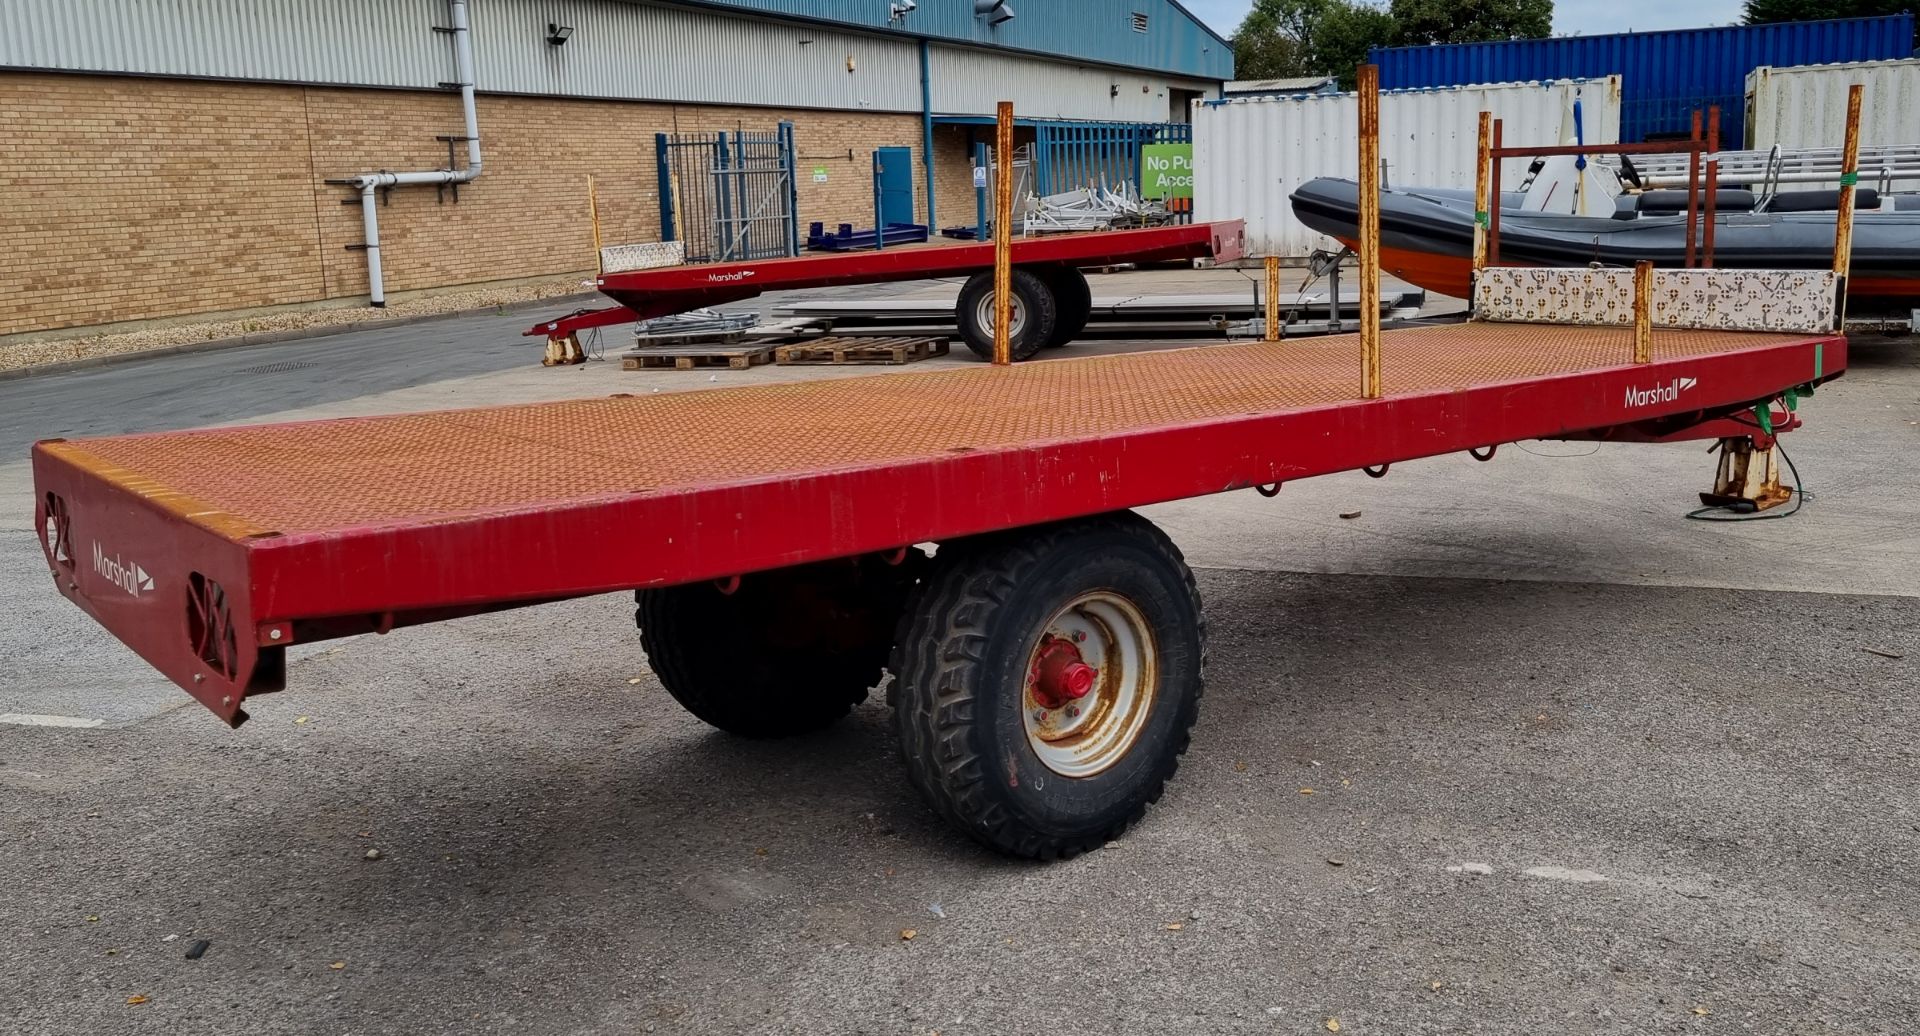 Marshall BC18N 2019 single axle flatbed trailer - 5000 kg carrying capacity - 40kph max design speed - Image 4 of 9